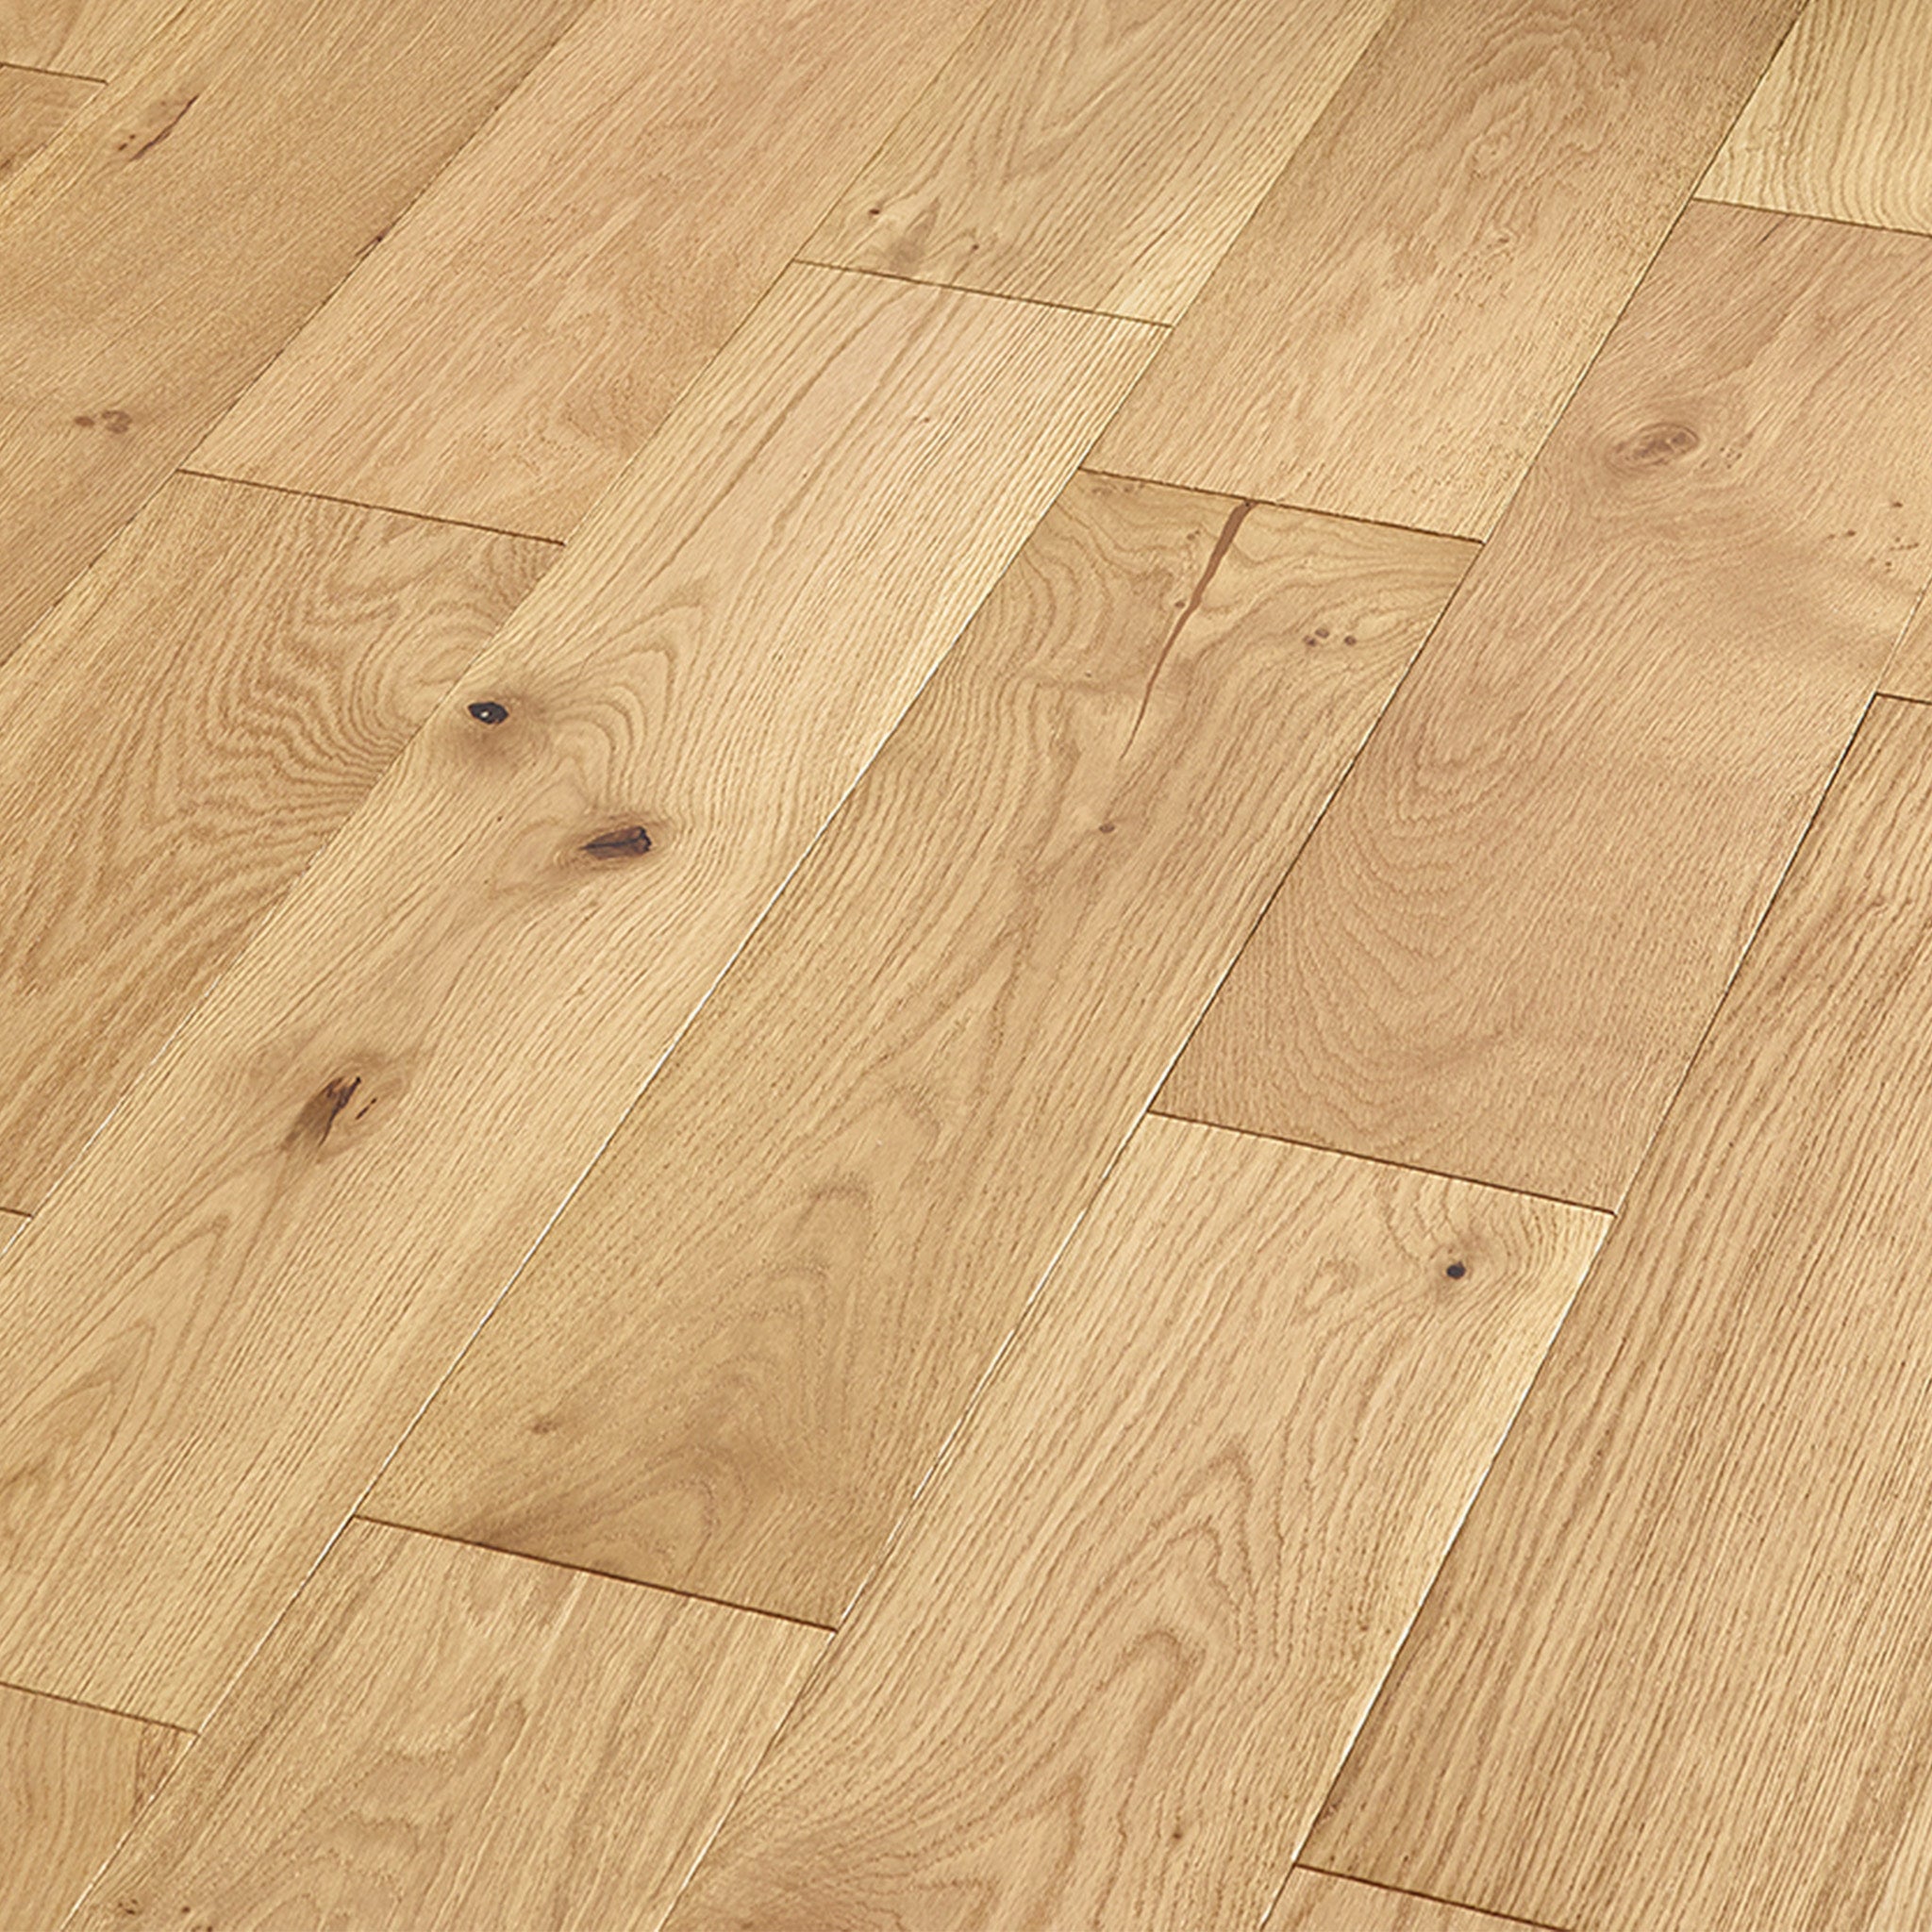 Brushed & Oiled 14/3 x 150mm Straight Engineered